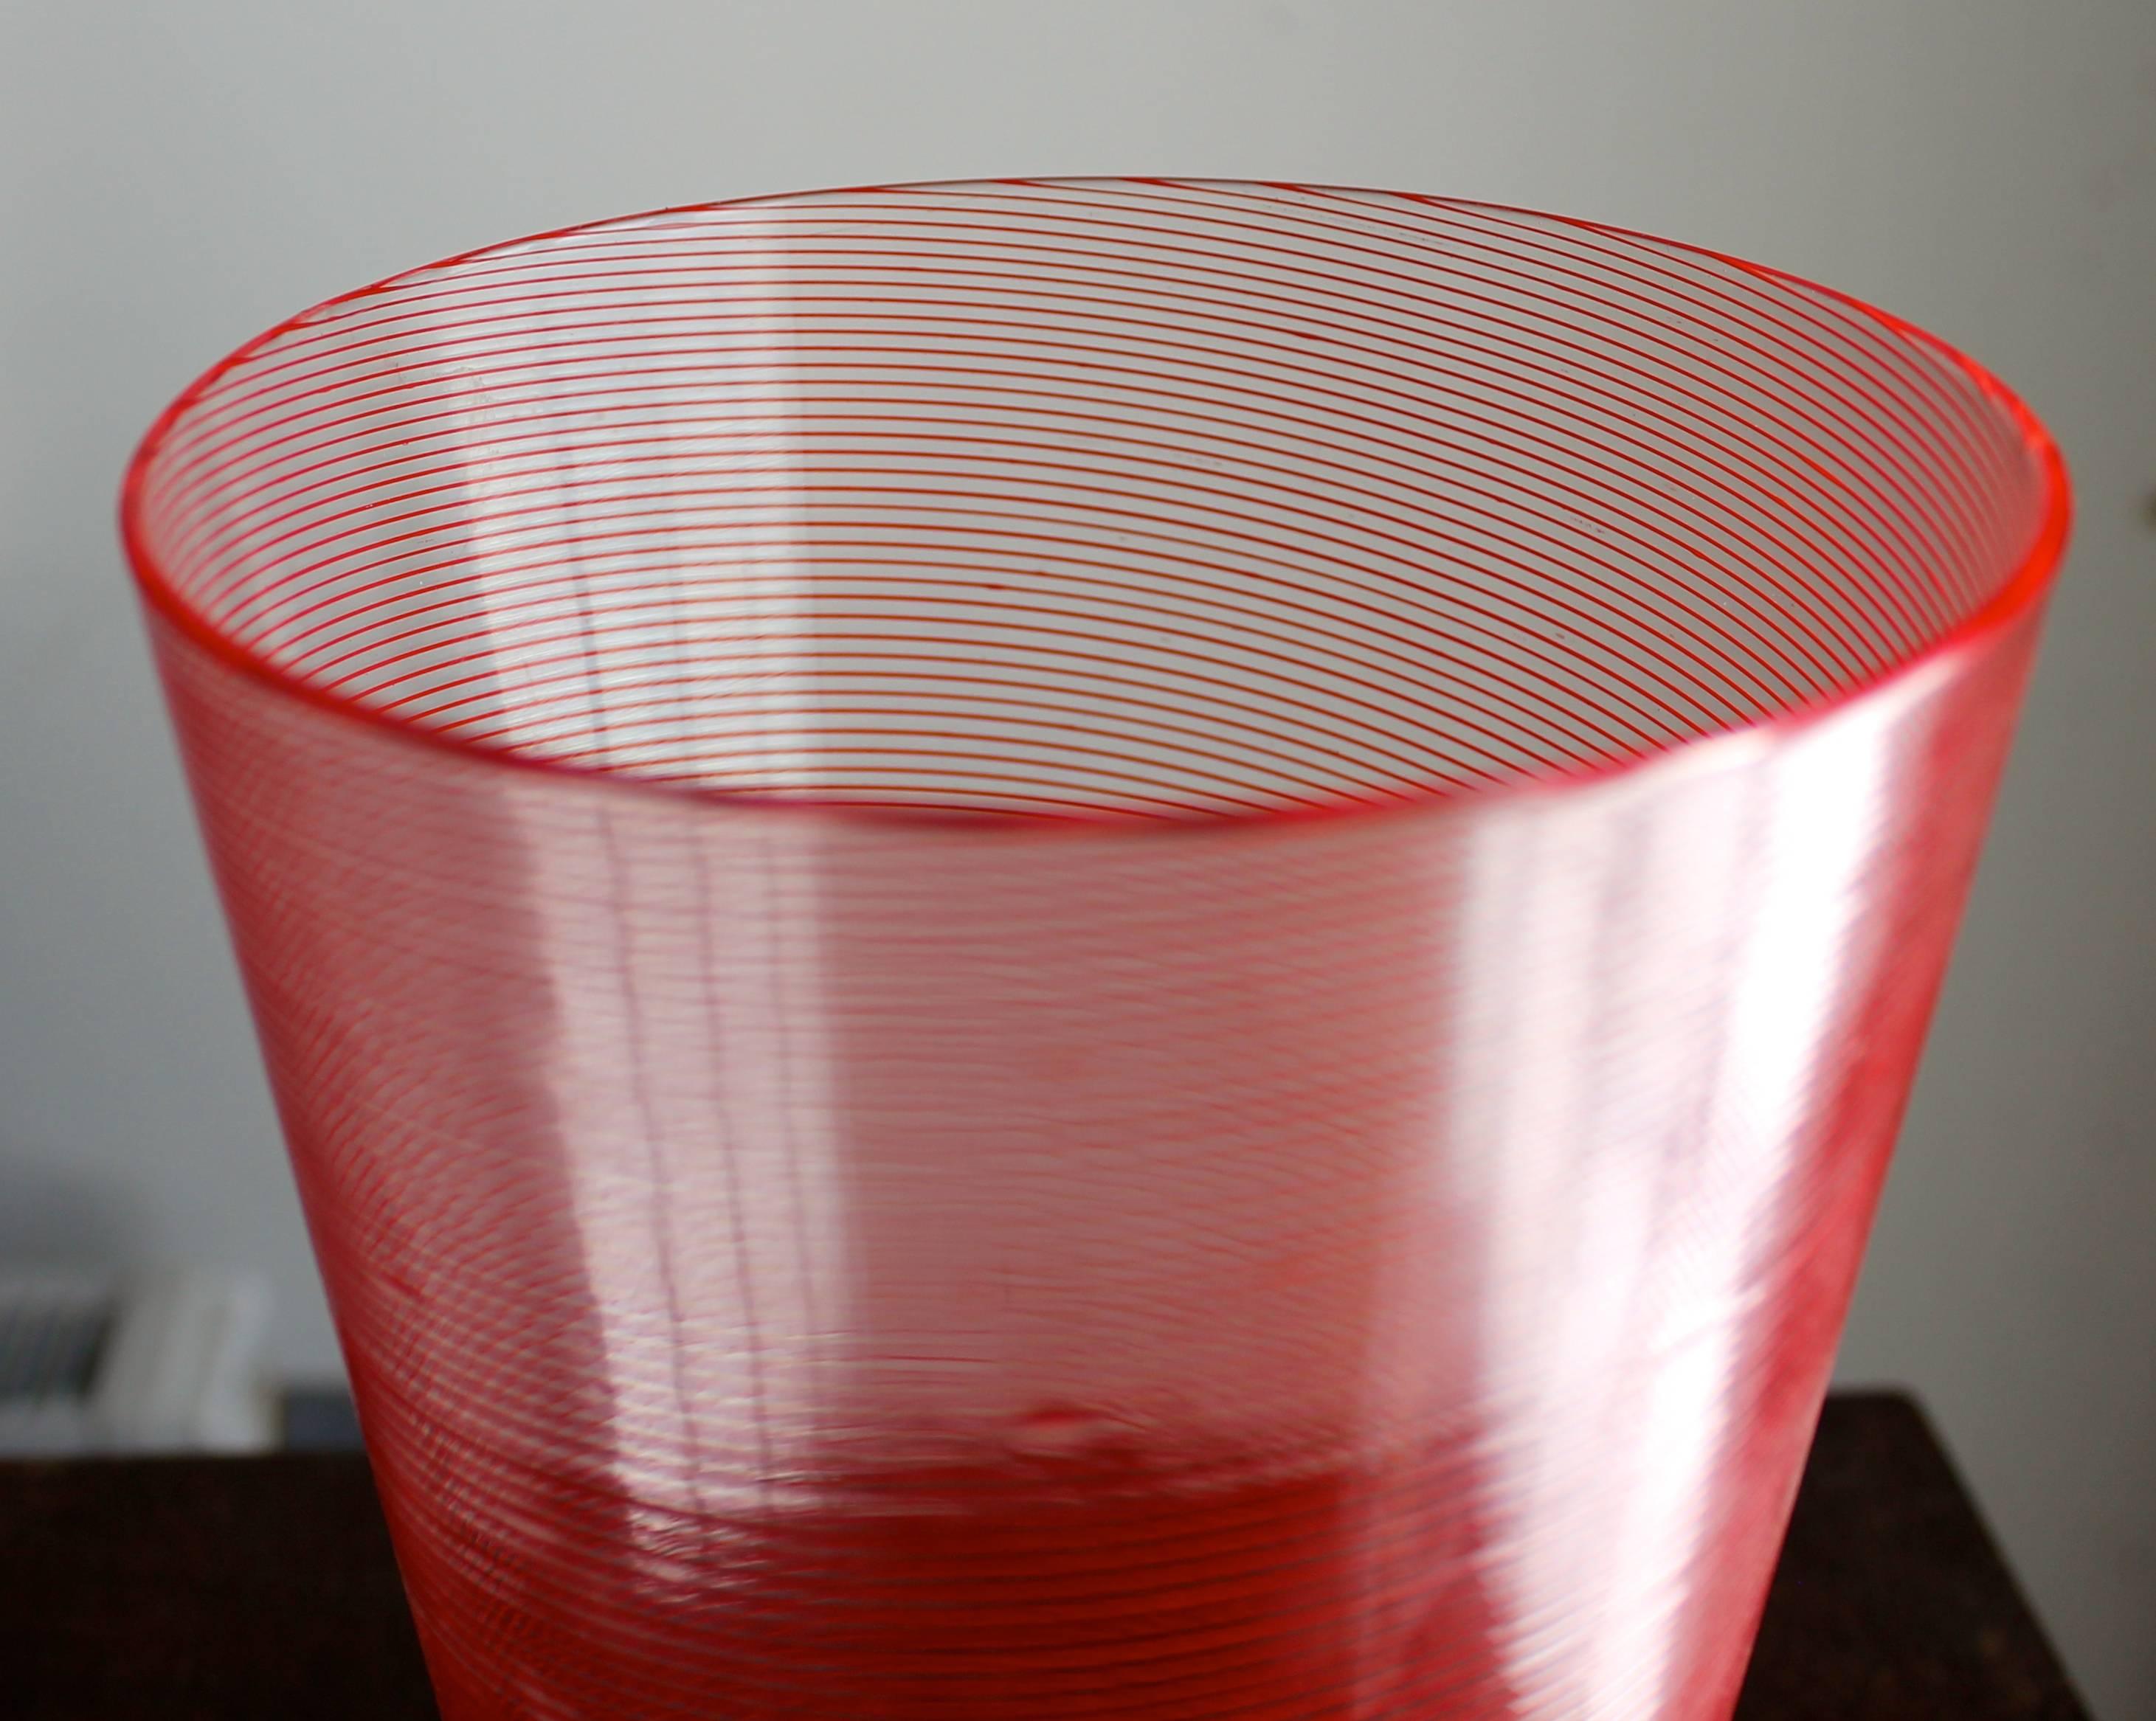 Very fine red glass thread on clear round truncated soffiati. Unsigned, (missing the usual paper label).